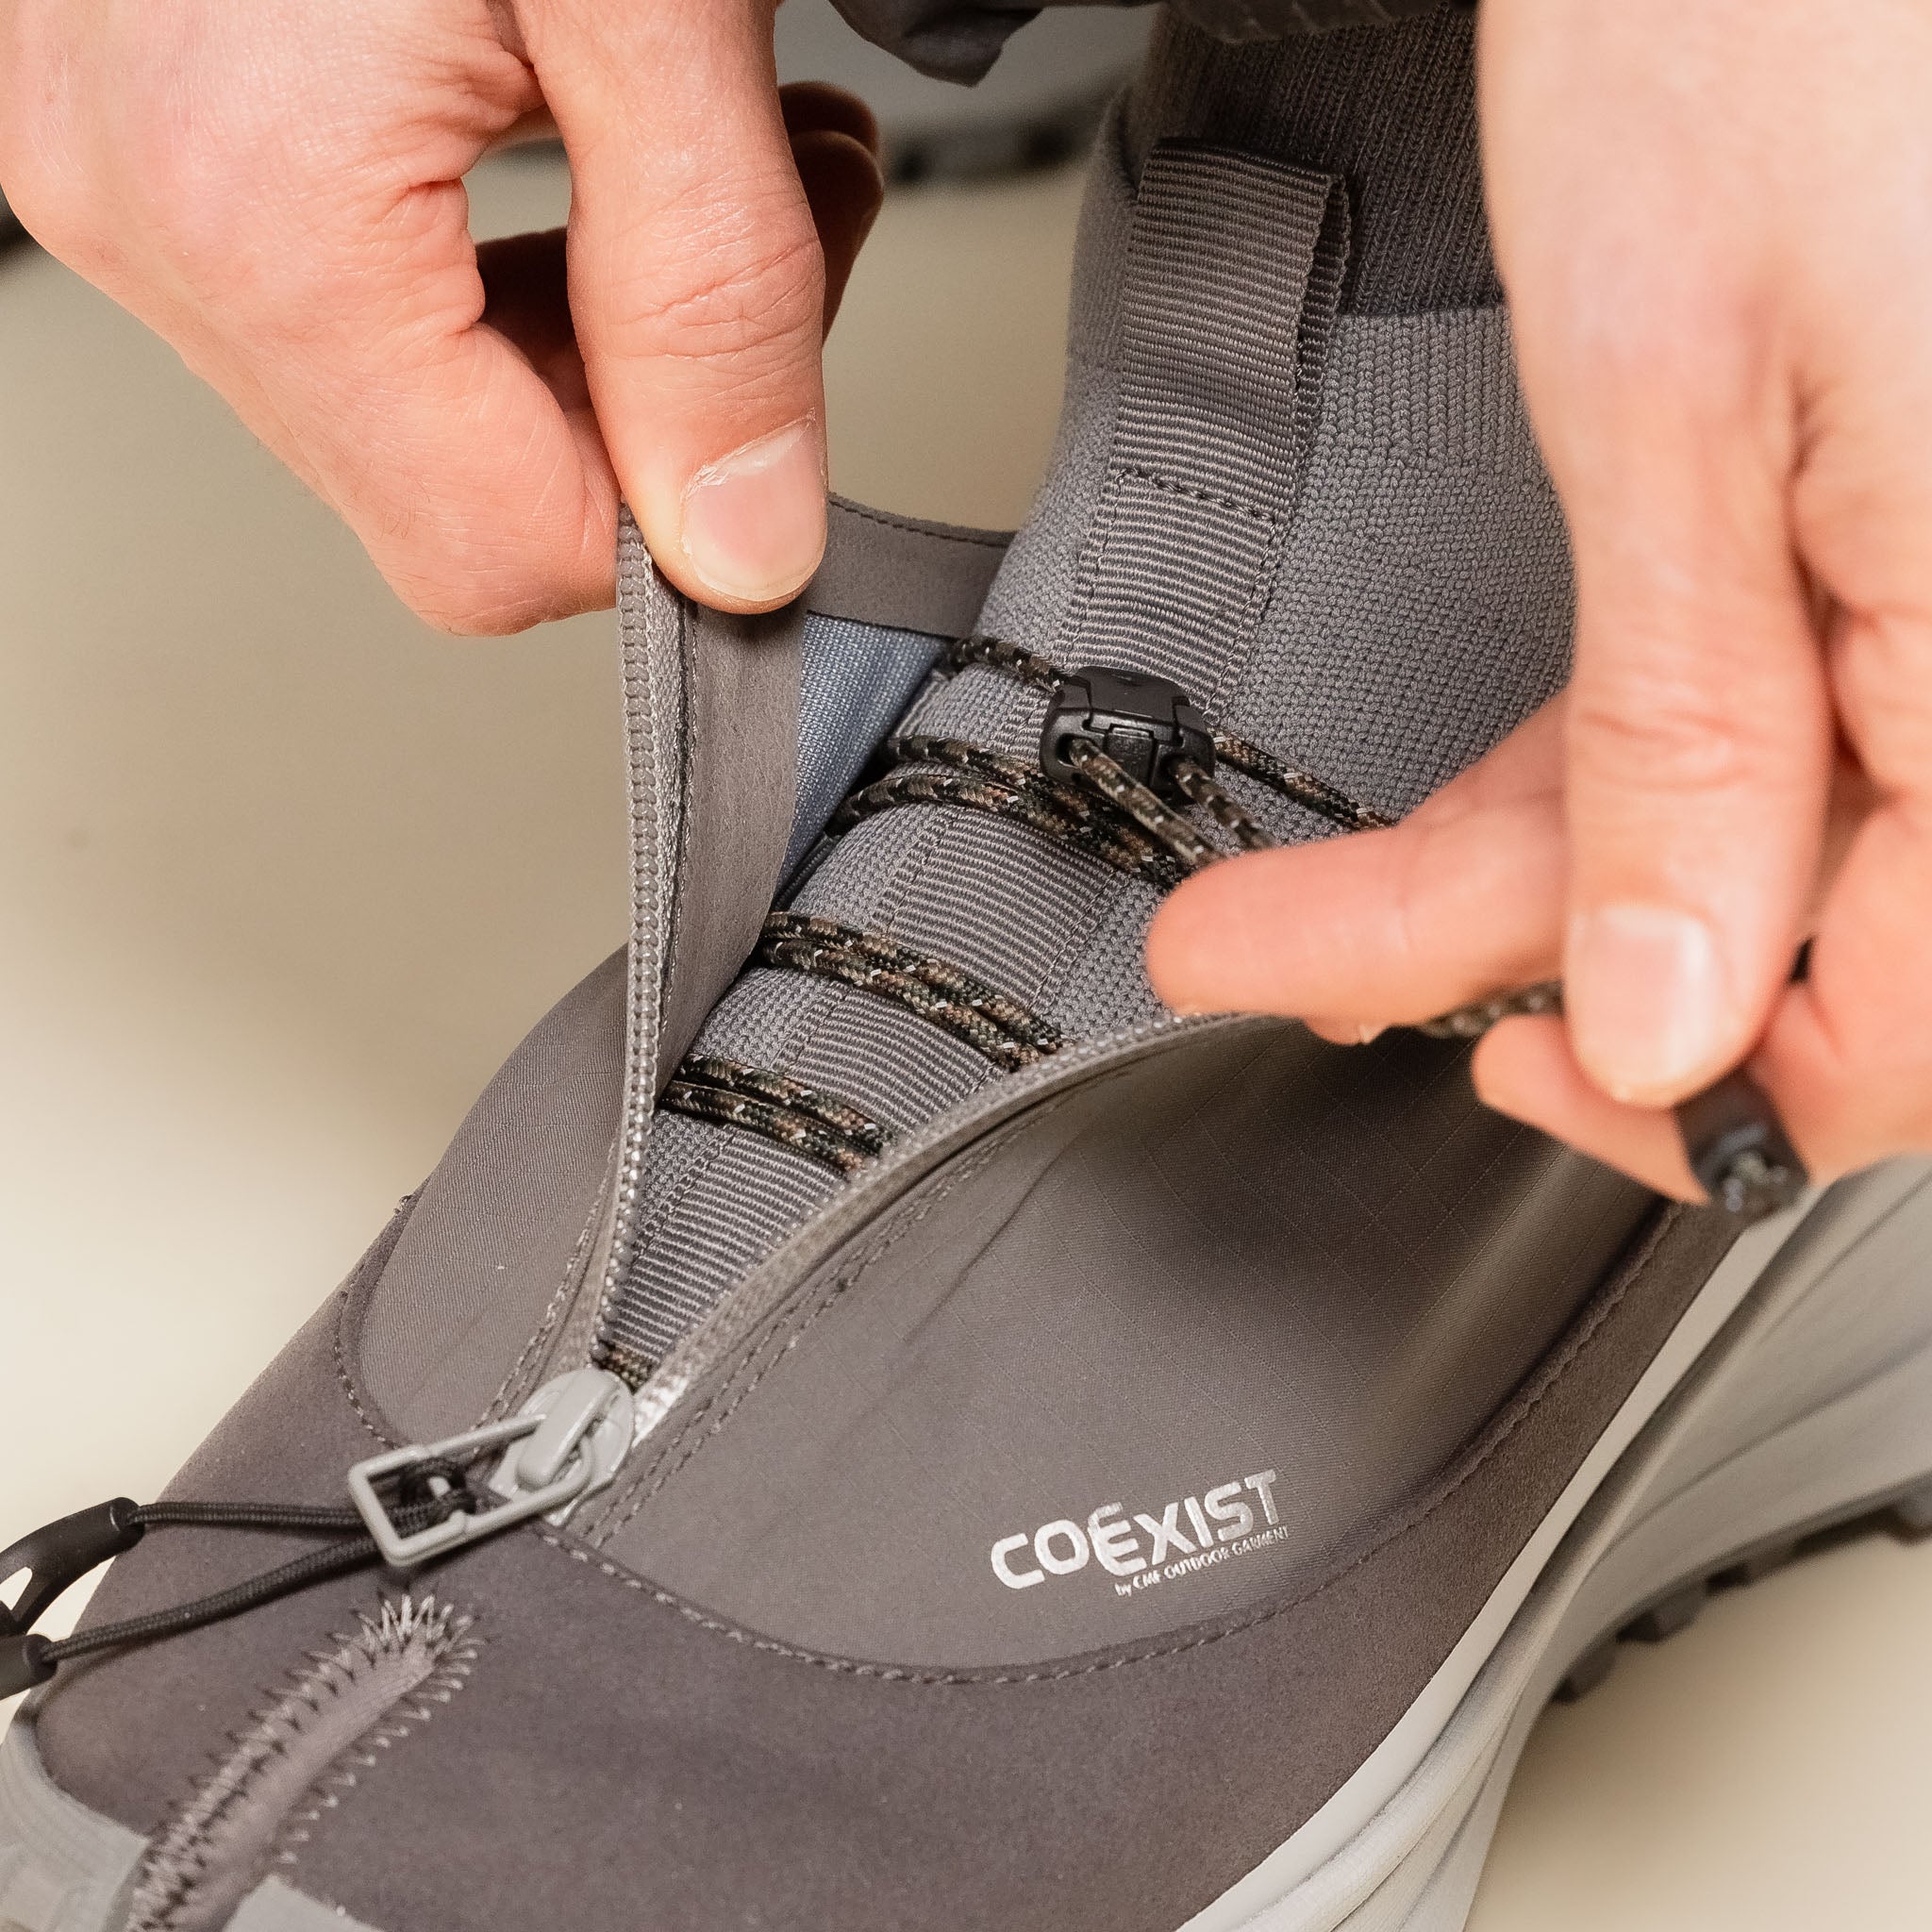 CMF Comfy Outdoor Garment - Approach Shoes 03 Knit - Grey "cmf outdoor garment stockist" "cmf outdoor garment shoes" "comfy outdoor garment shoes"